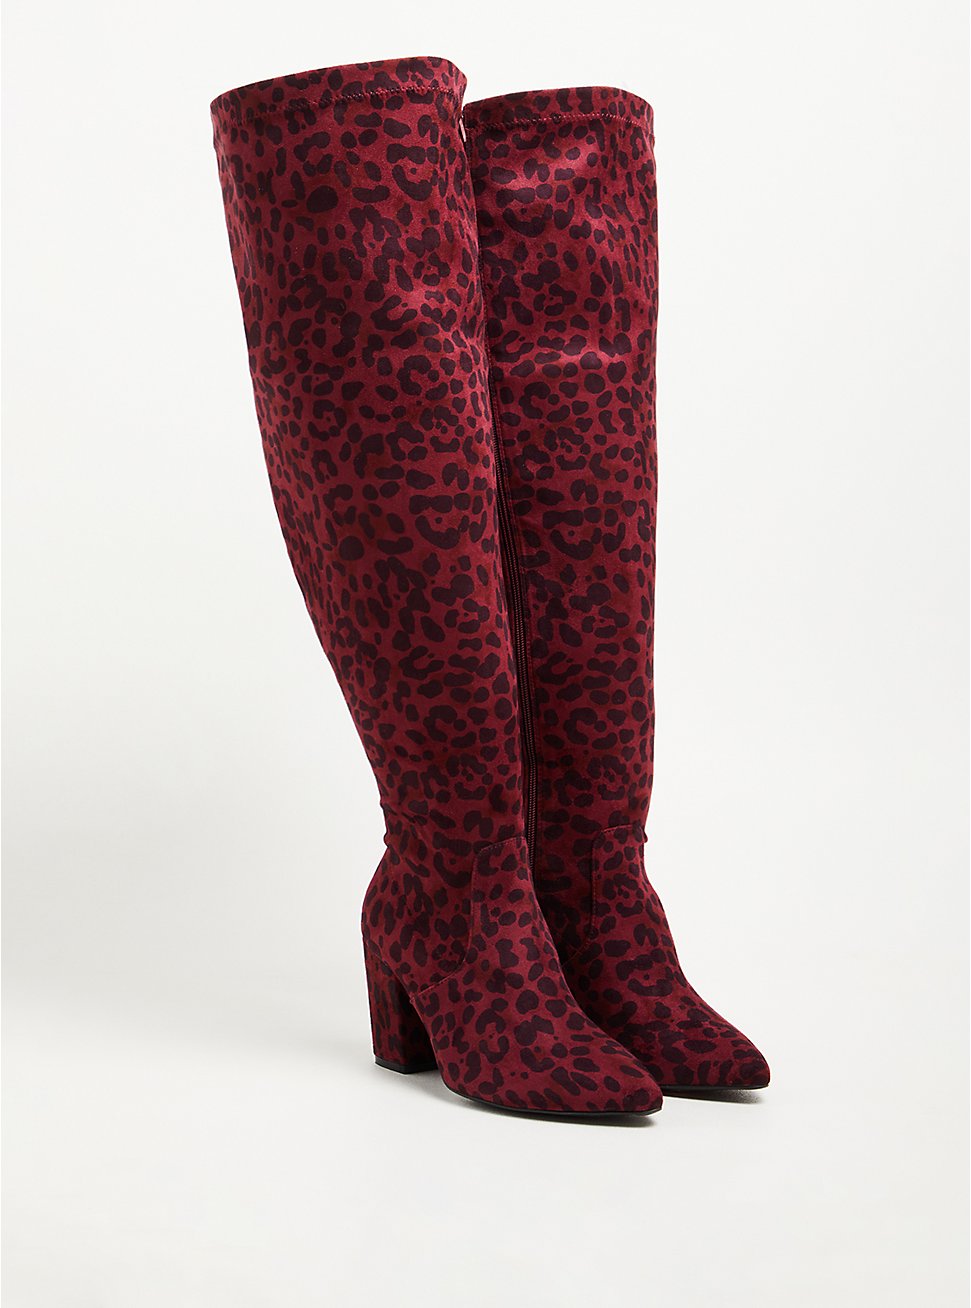 Pointed Toe Over-The-Knee Boot (WW), BURGUNDY, hi-res